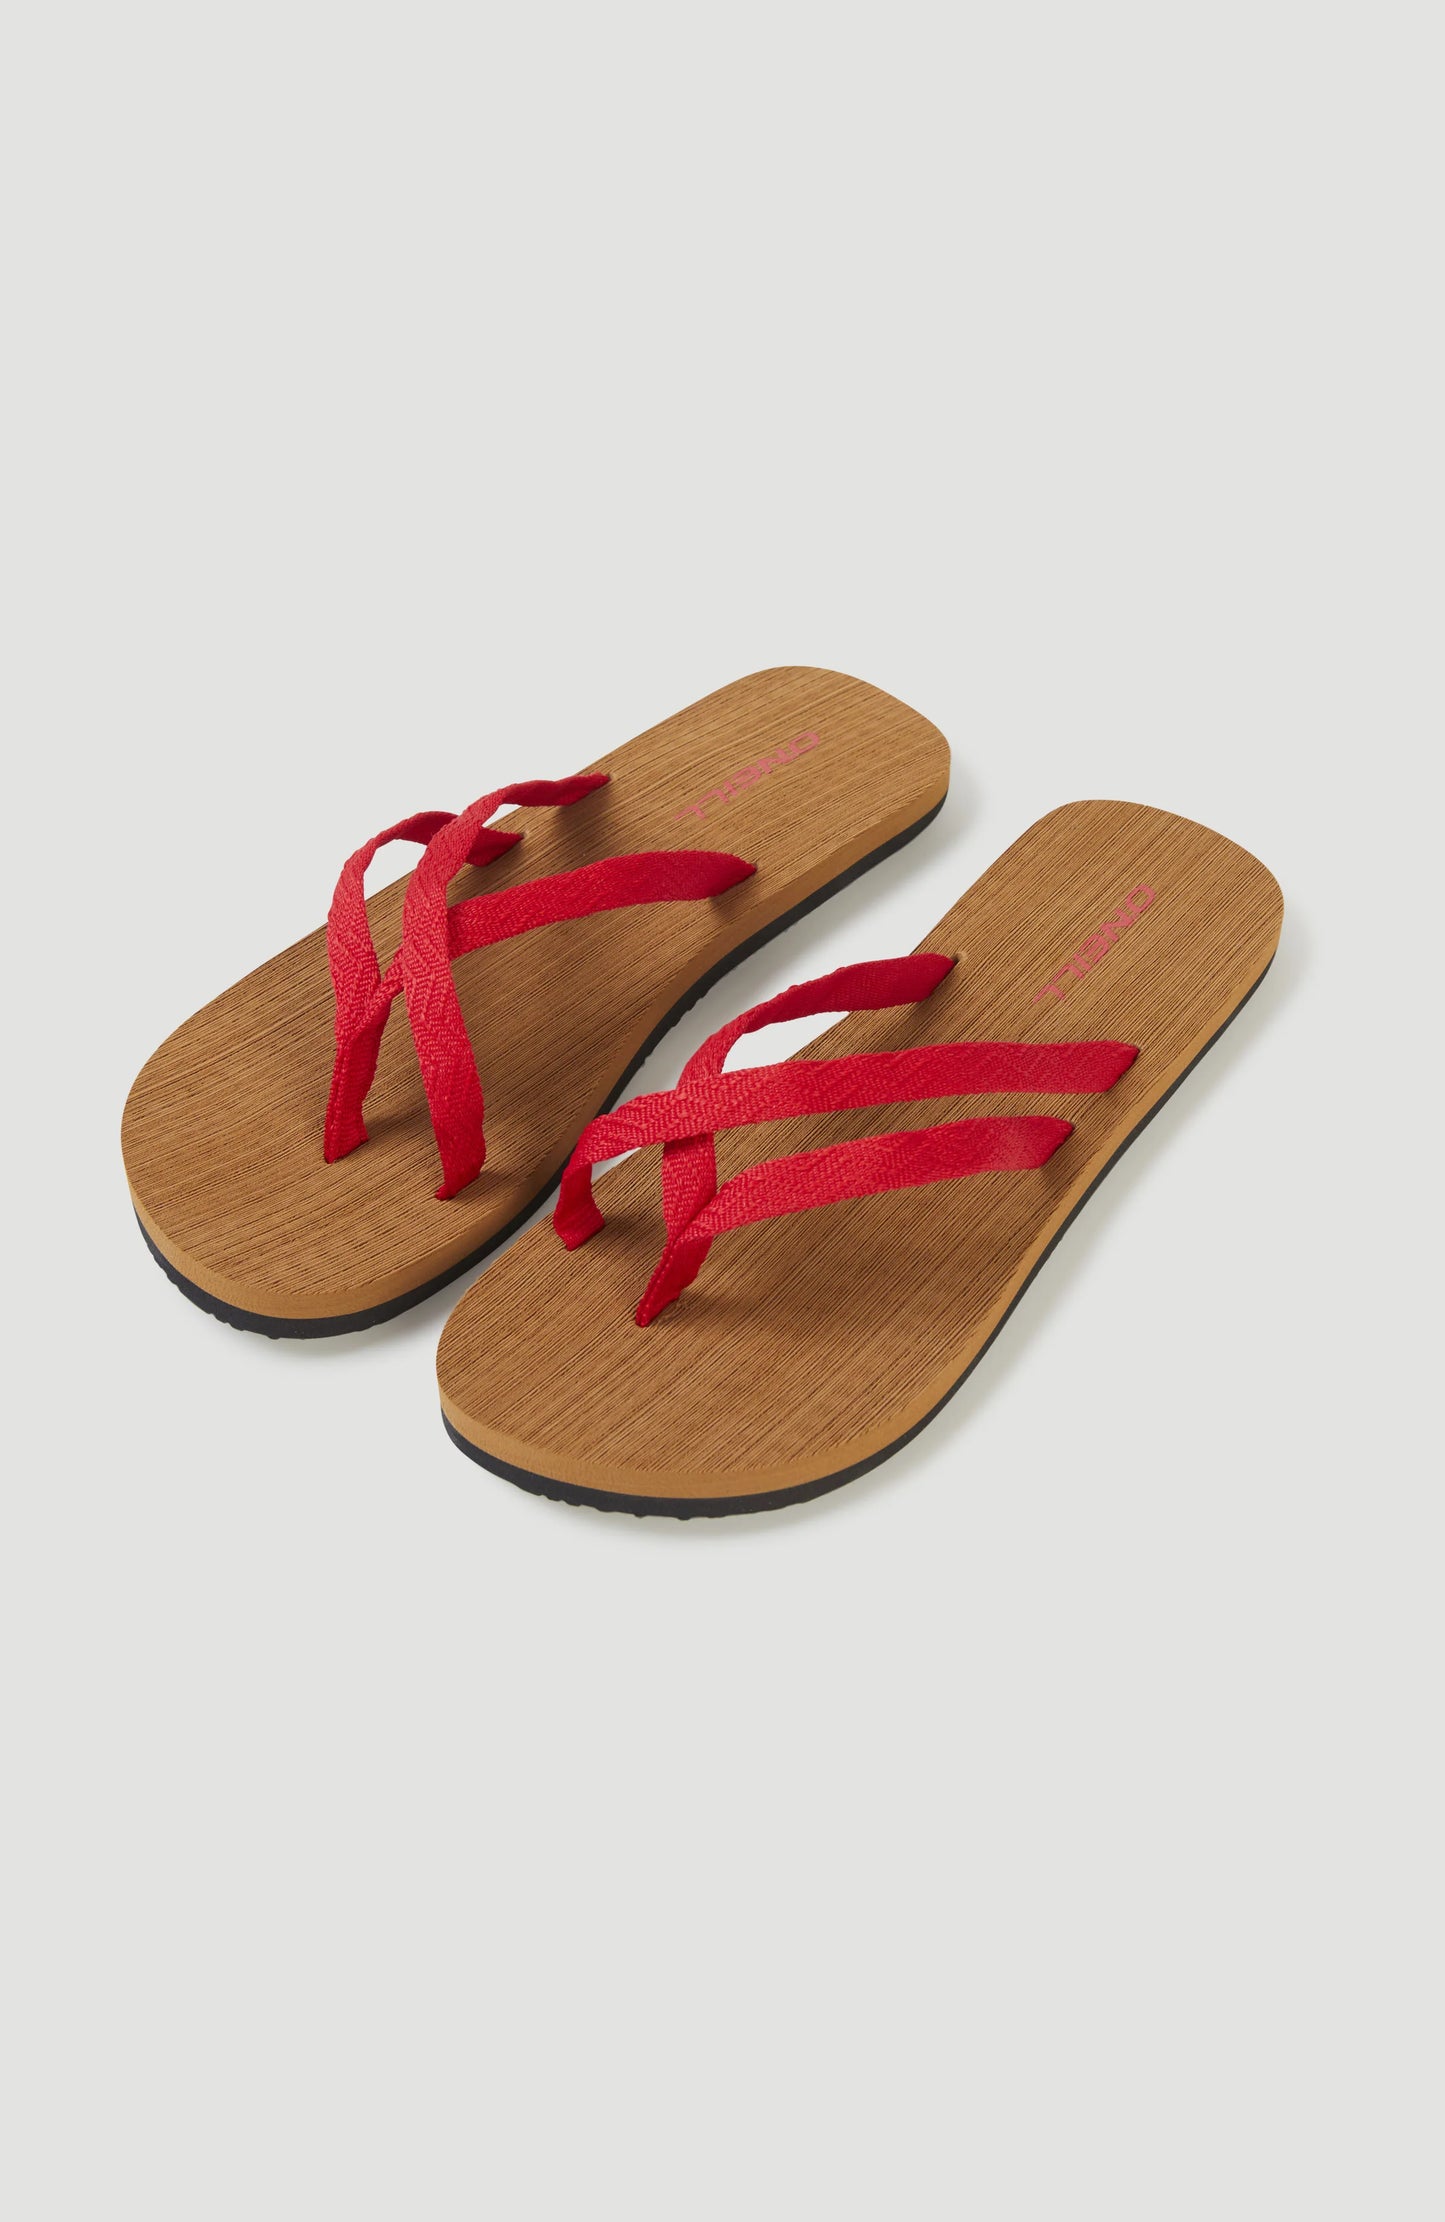 Red Ditsy O'Neill Sandal